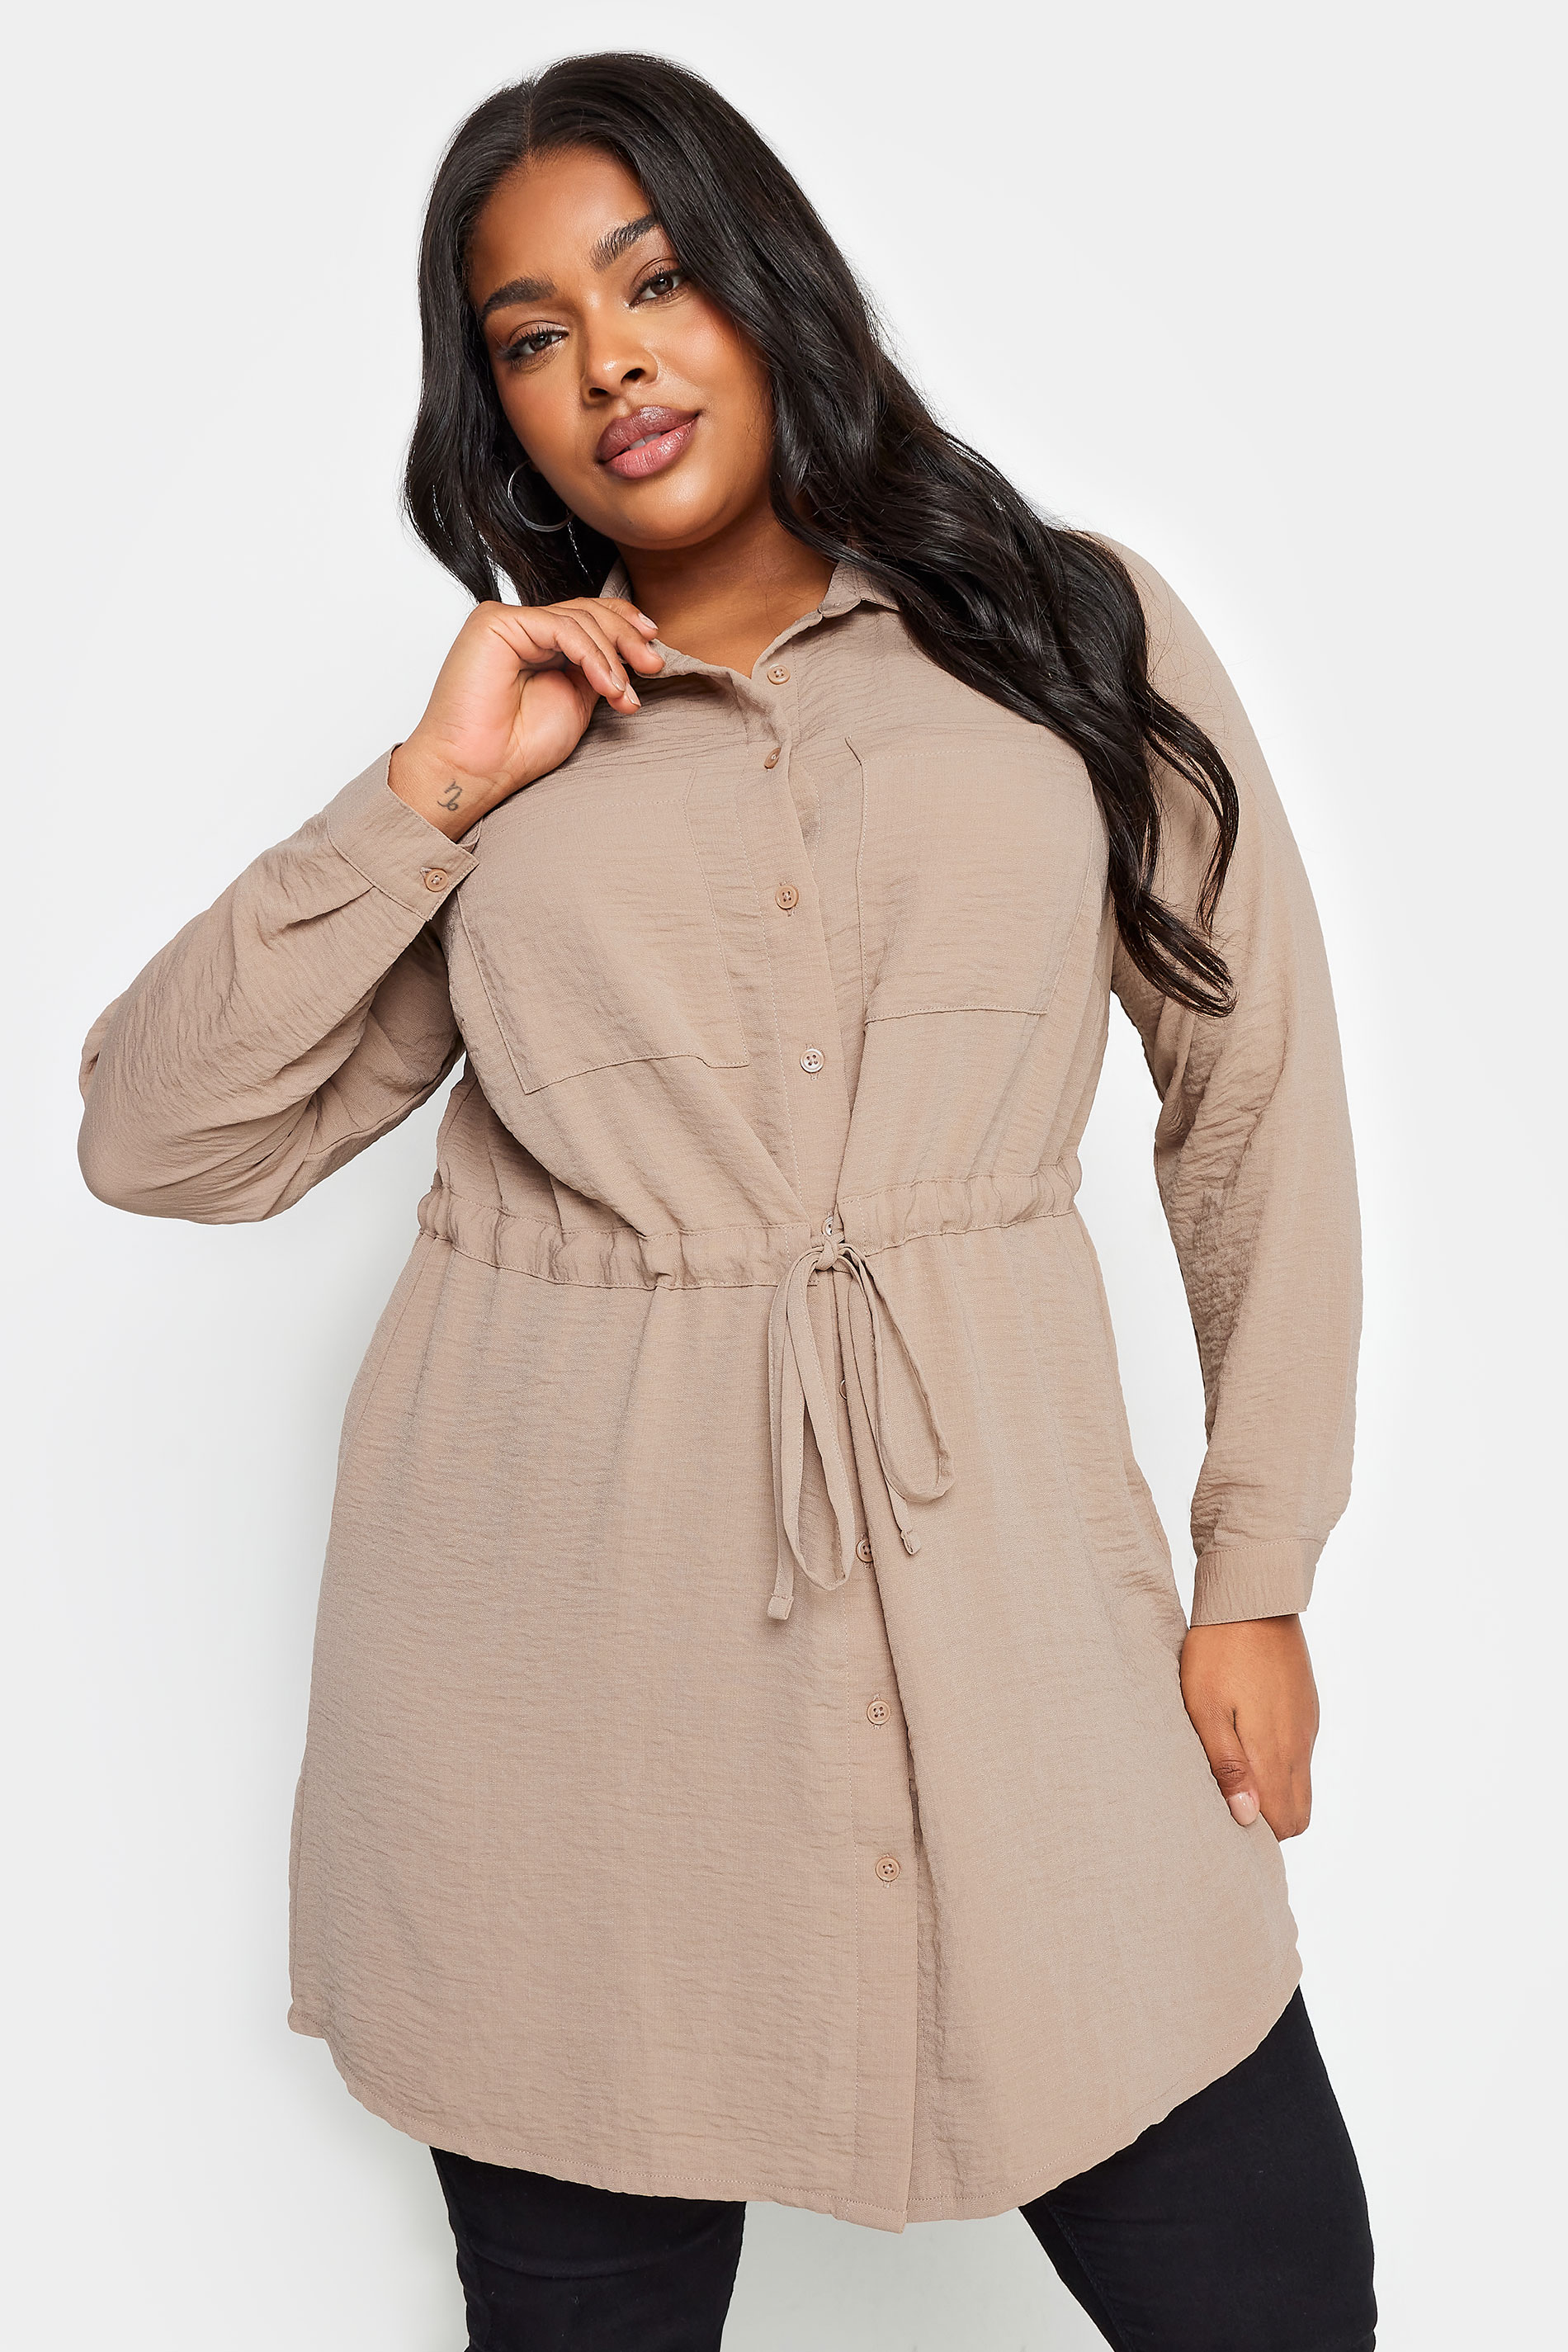 YOURS Plus Size Beige Brown Utility Tunic Shirt